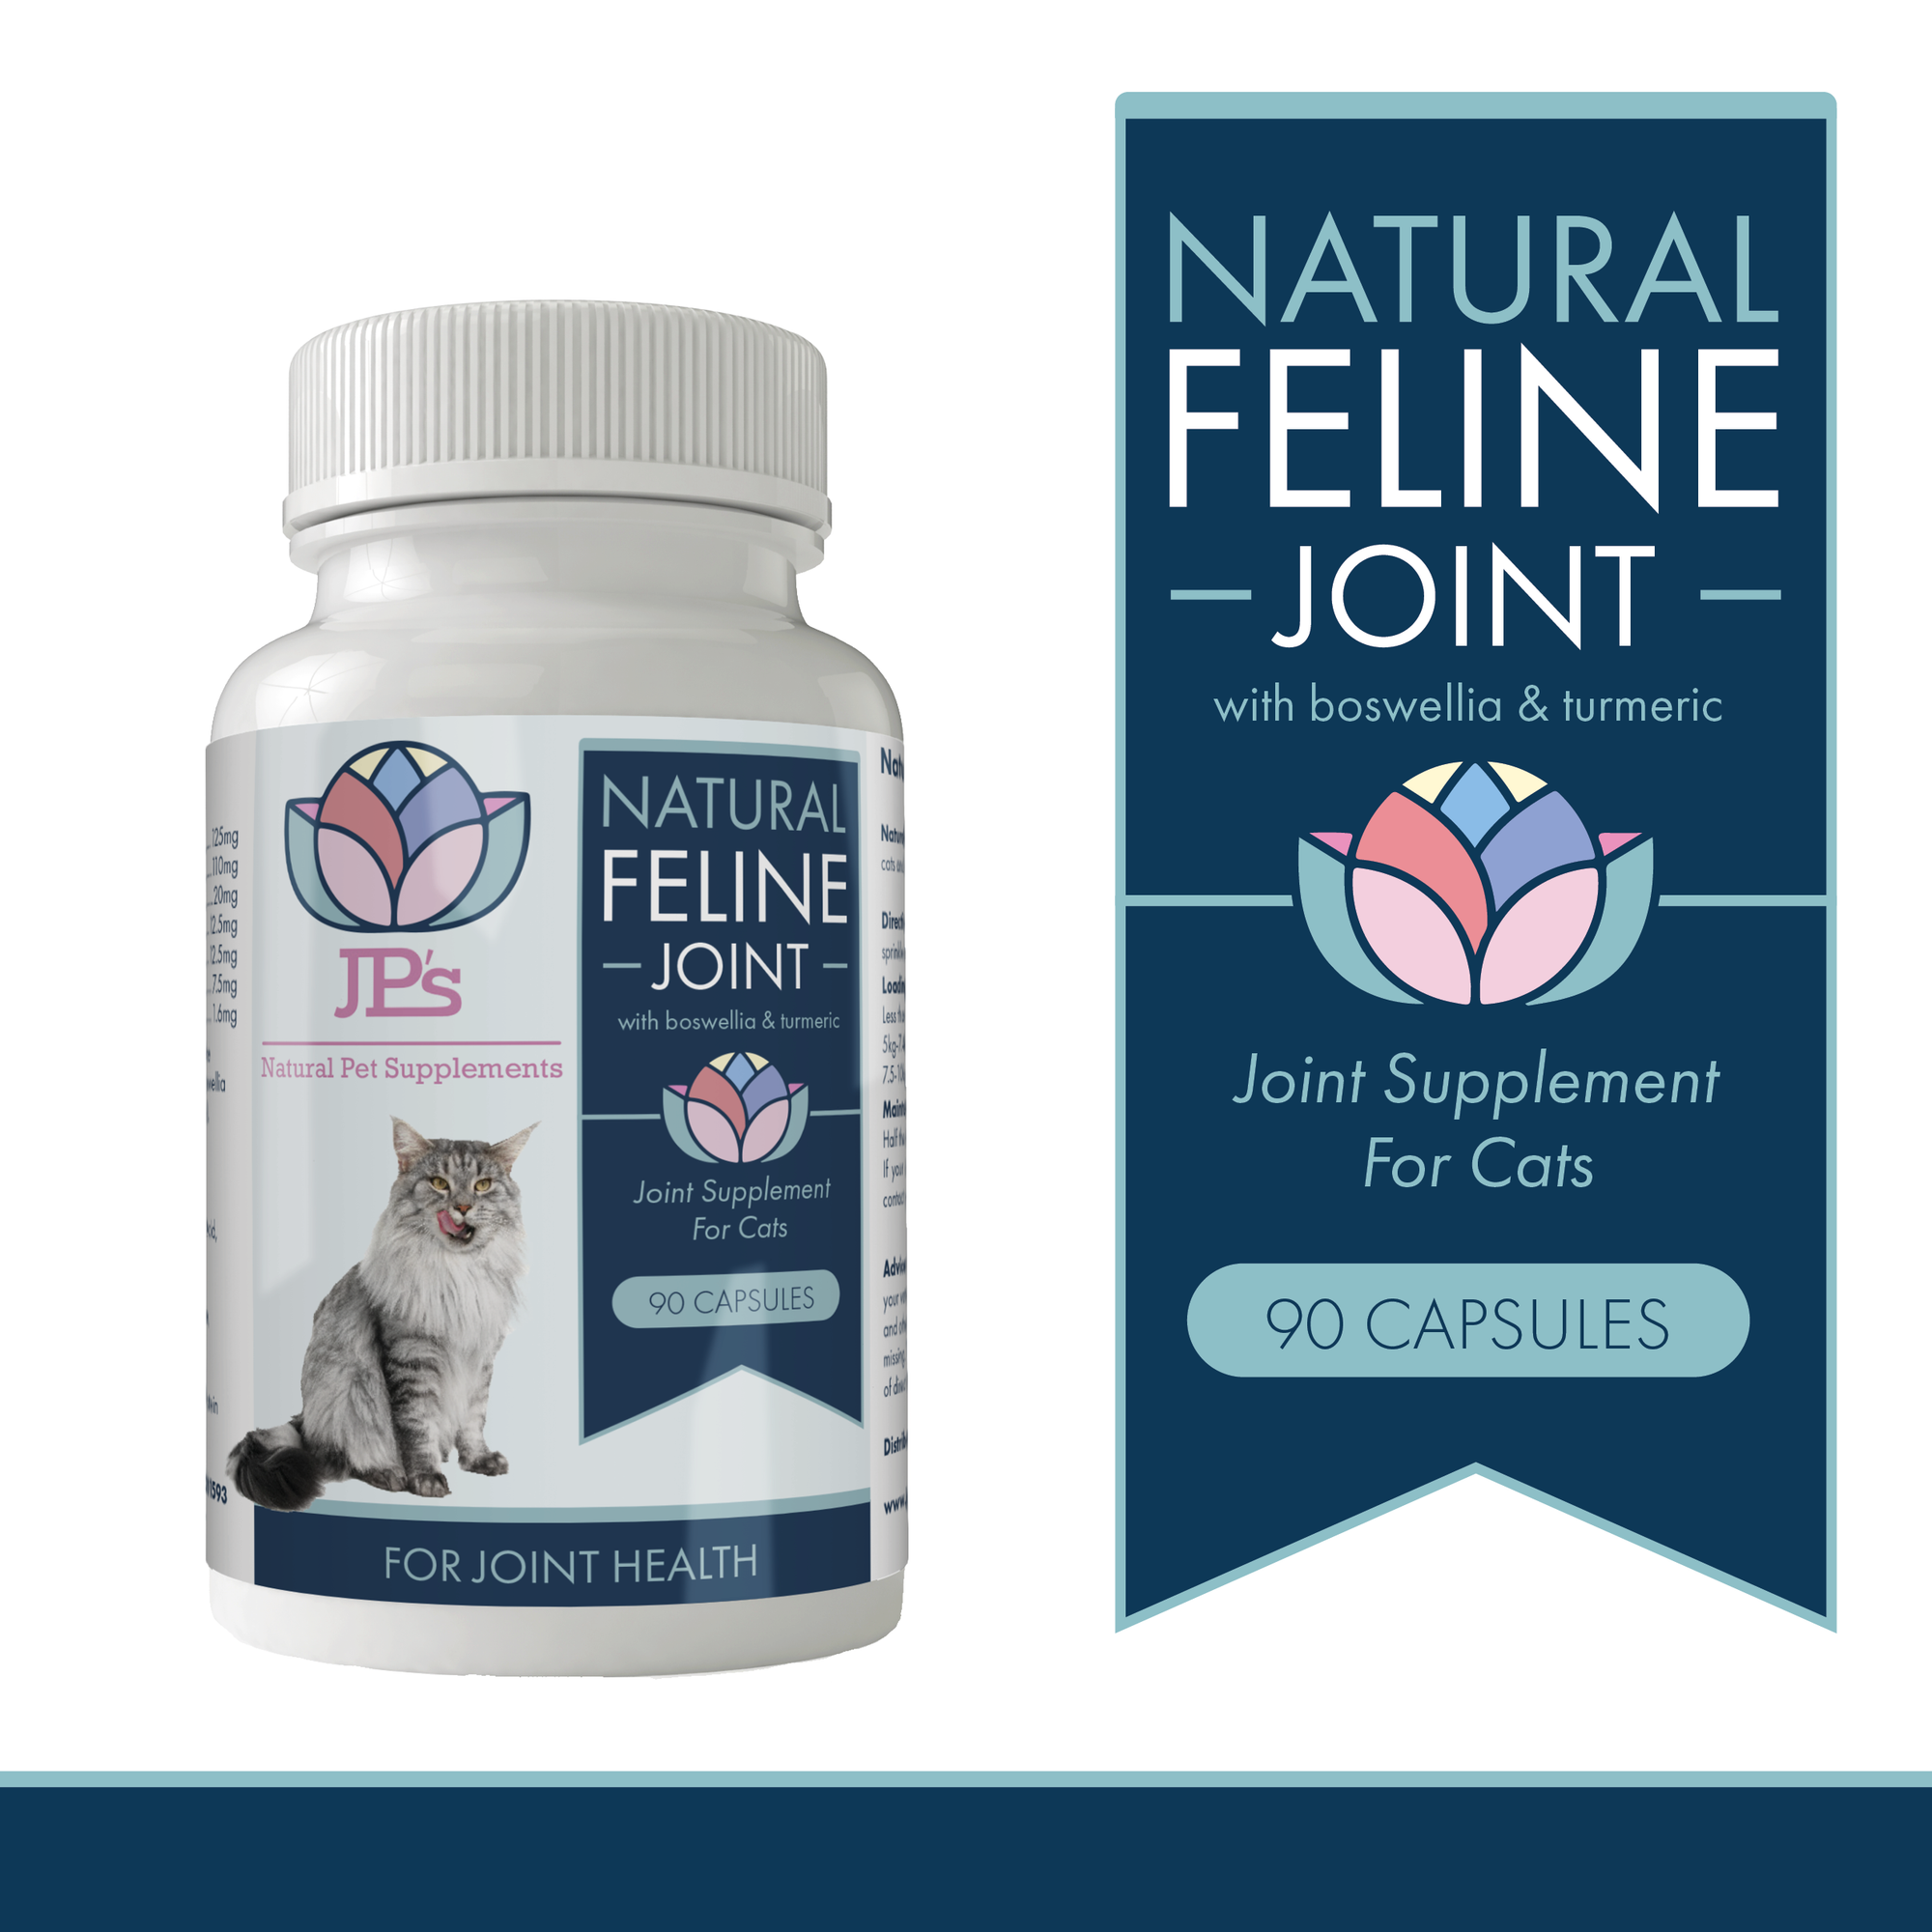 Cat joint supplement with boswellia and turmeric